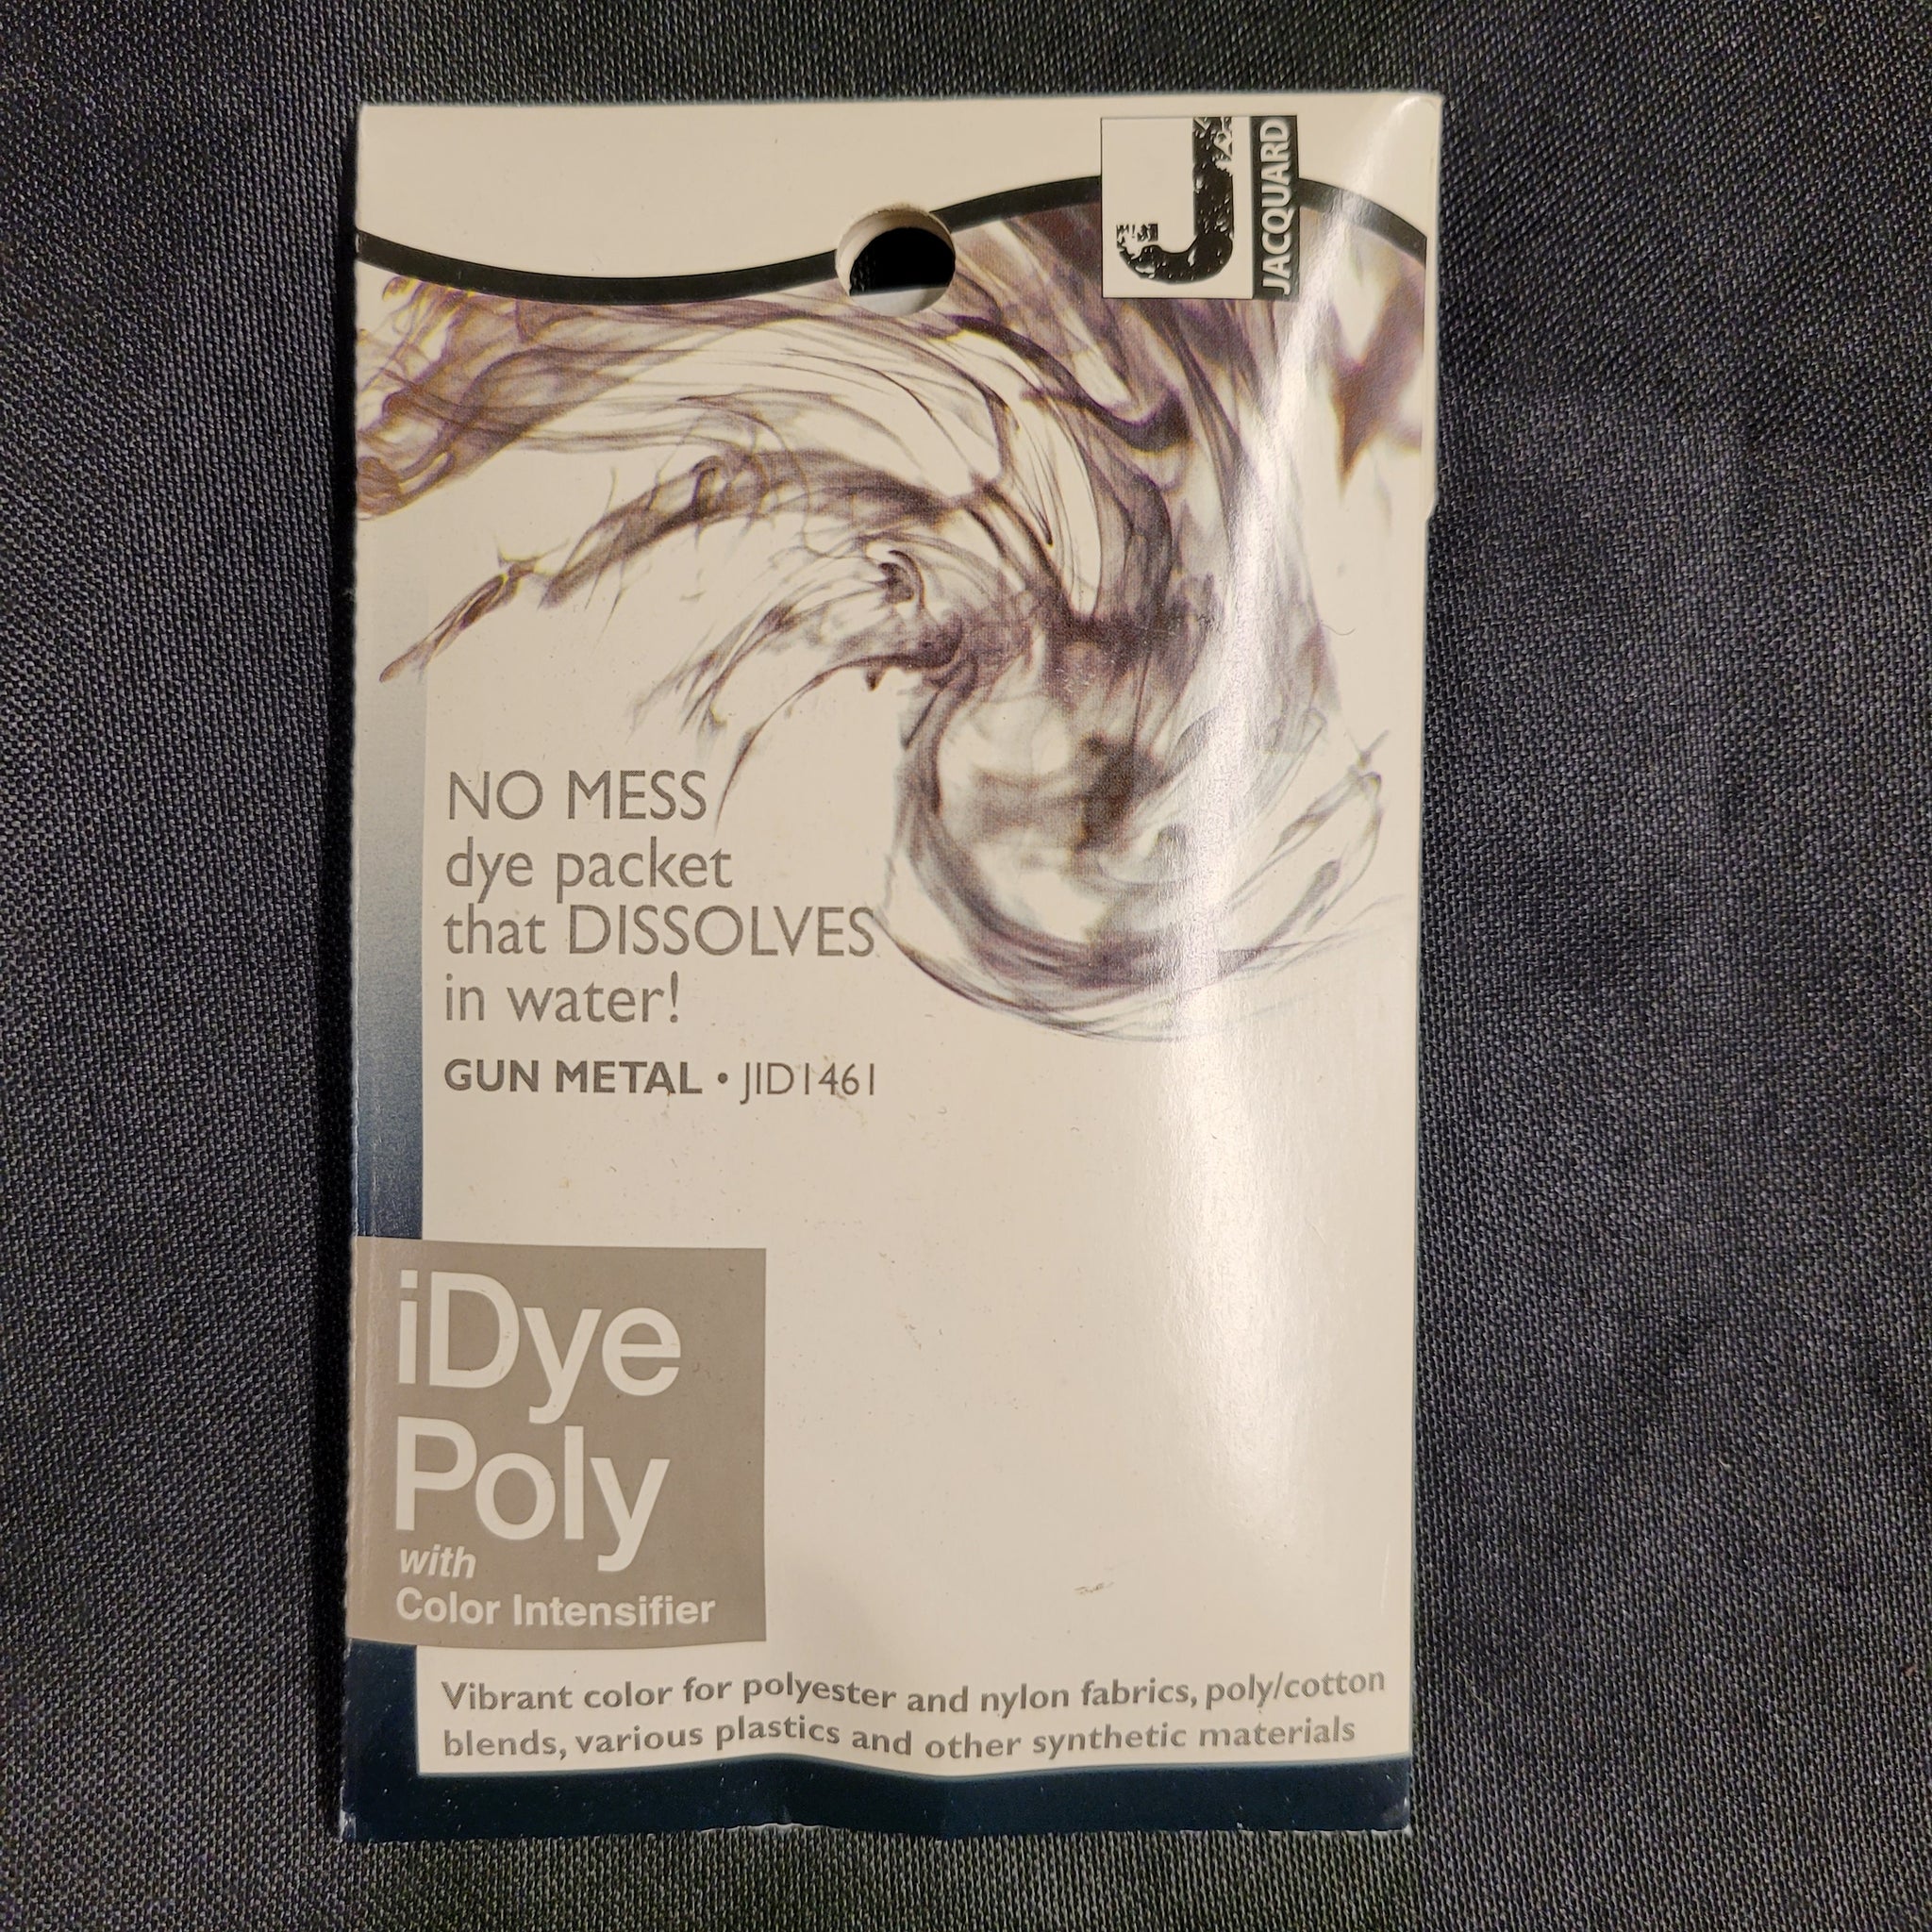 Find Your Jacquard Idye-Silver Gray 14Gm (Poly/Disperse) 209 - There is a  Wide Variety